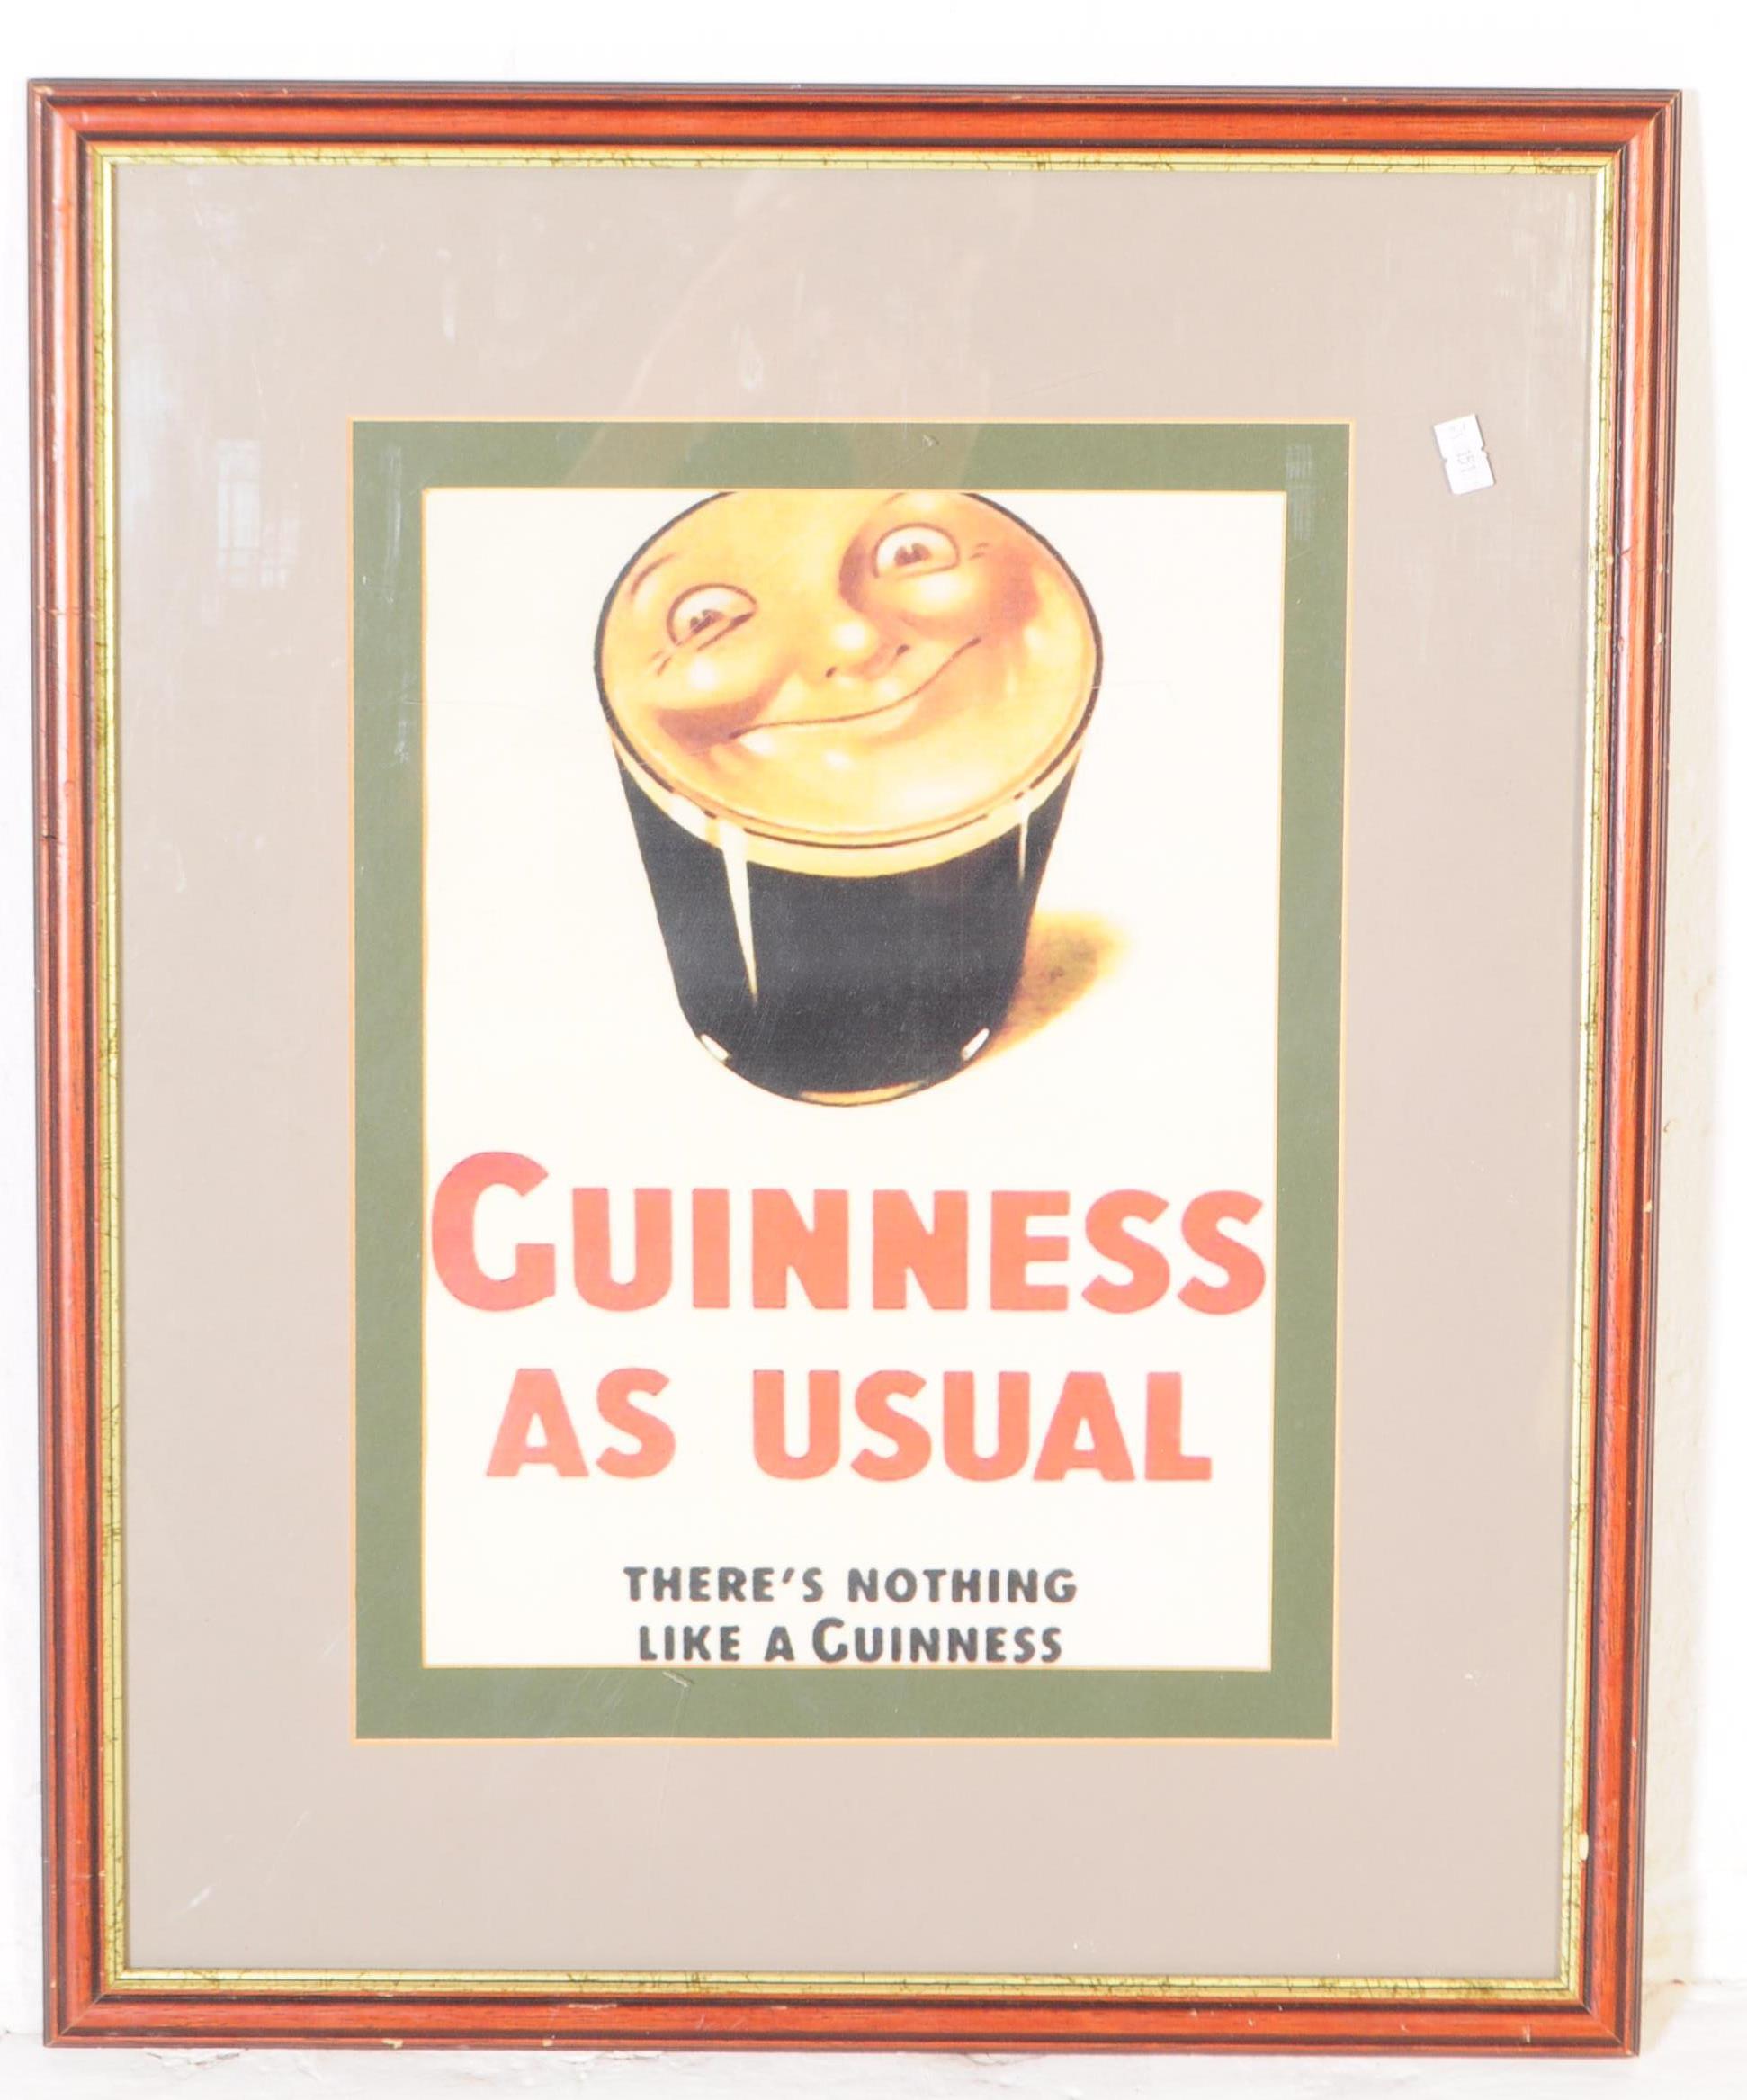 GUINNESS - COLLECTION OF REPRODUCTION ADVERTISING PRINTS - Image 4 of 5